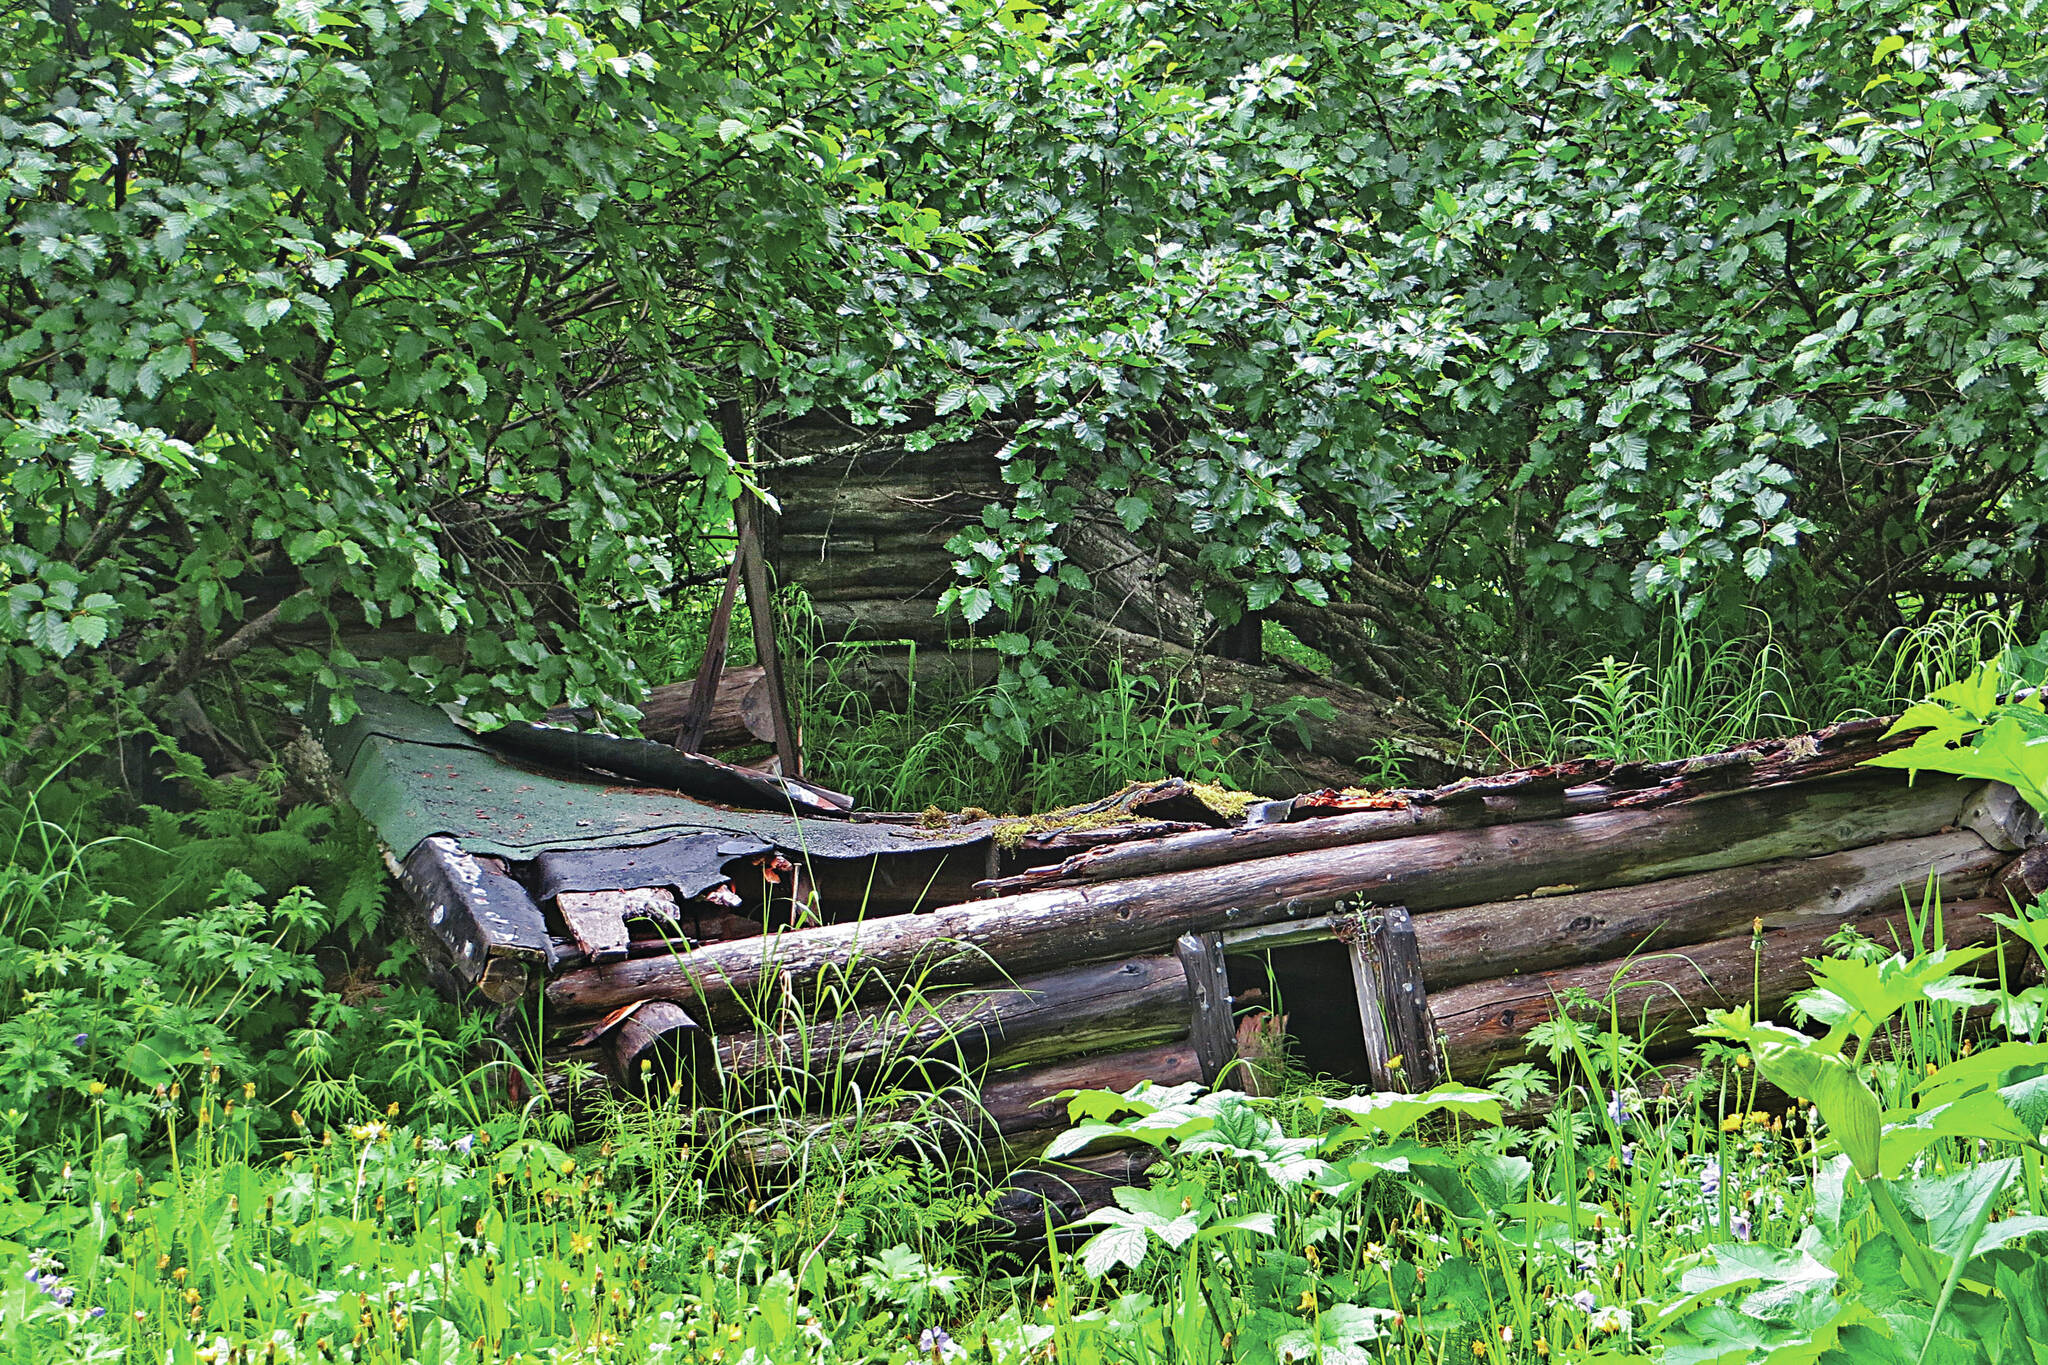 Photo by Clark Fair
In the summer of 2016, this was all that remained of Rex Hanks’s original homestead cabin, located just above the waterfall on Happy Creek.